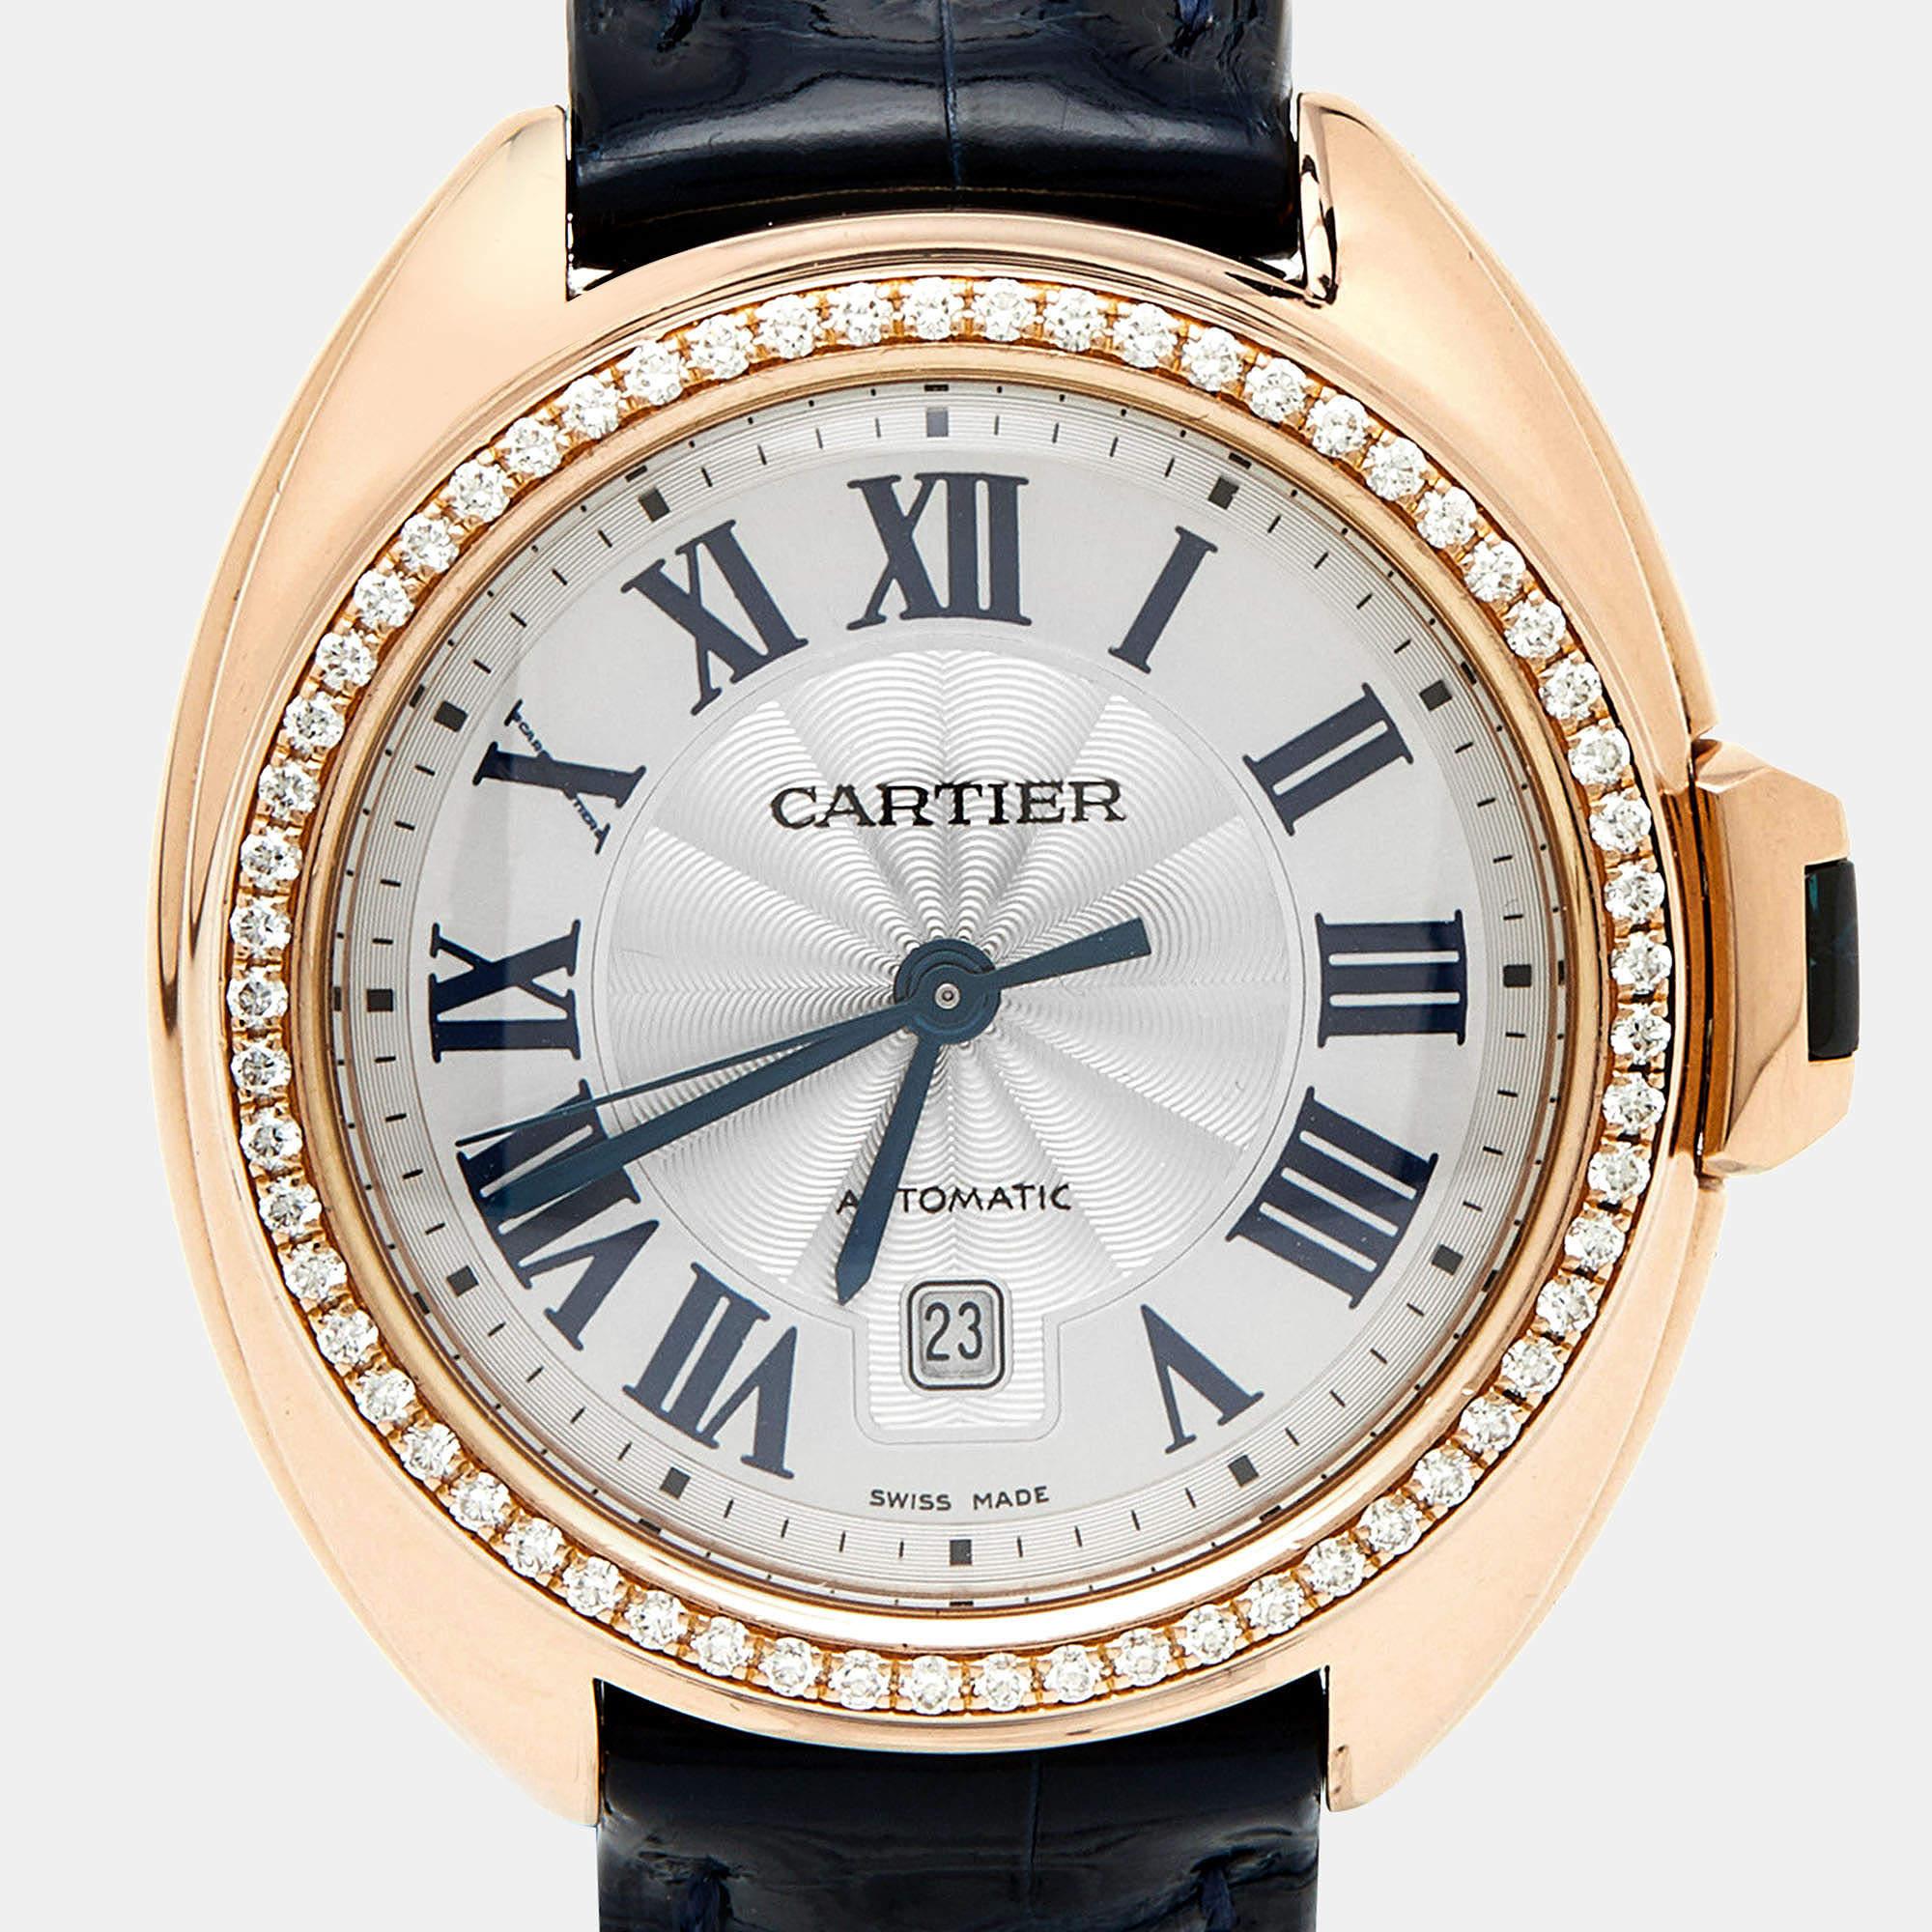 Cartier's Clé de Cartier WJCL0047 is an example of minimalist elegance. It is imbued with classic elements and Cartier's history of meticulous craftsmanship. This stunning luxury watch for women pairs an 18k rose gold case with an alligator leather